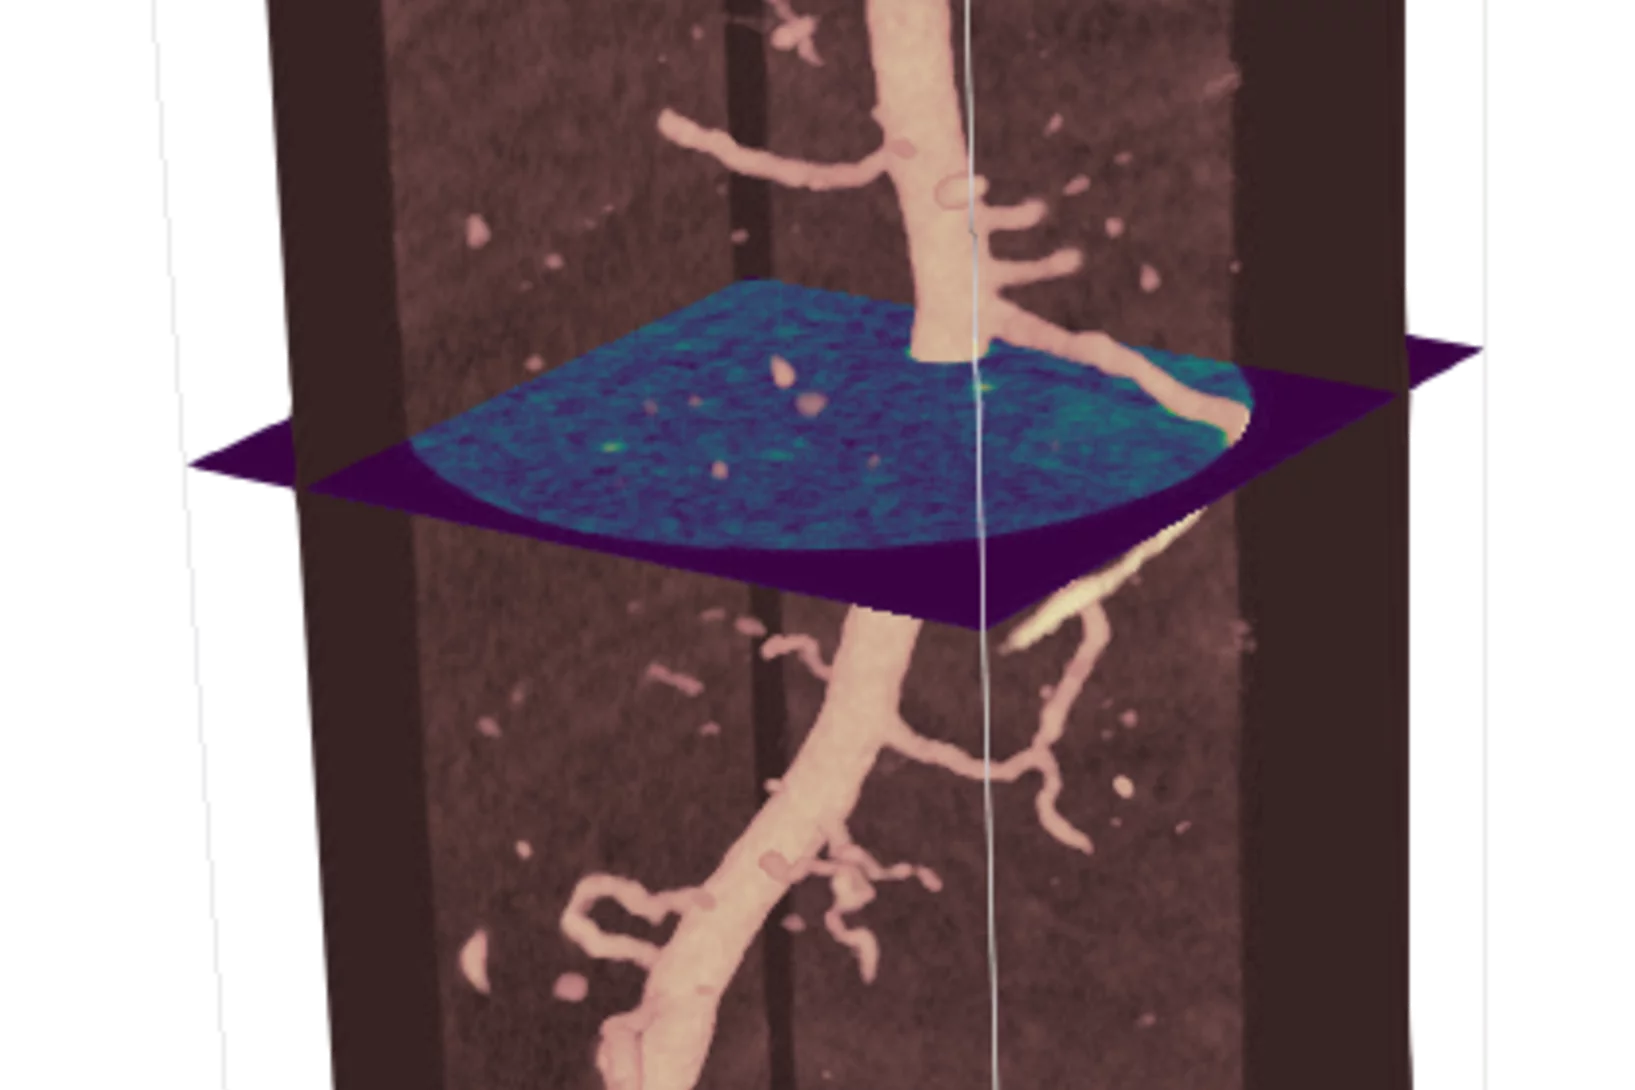 Root tomography